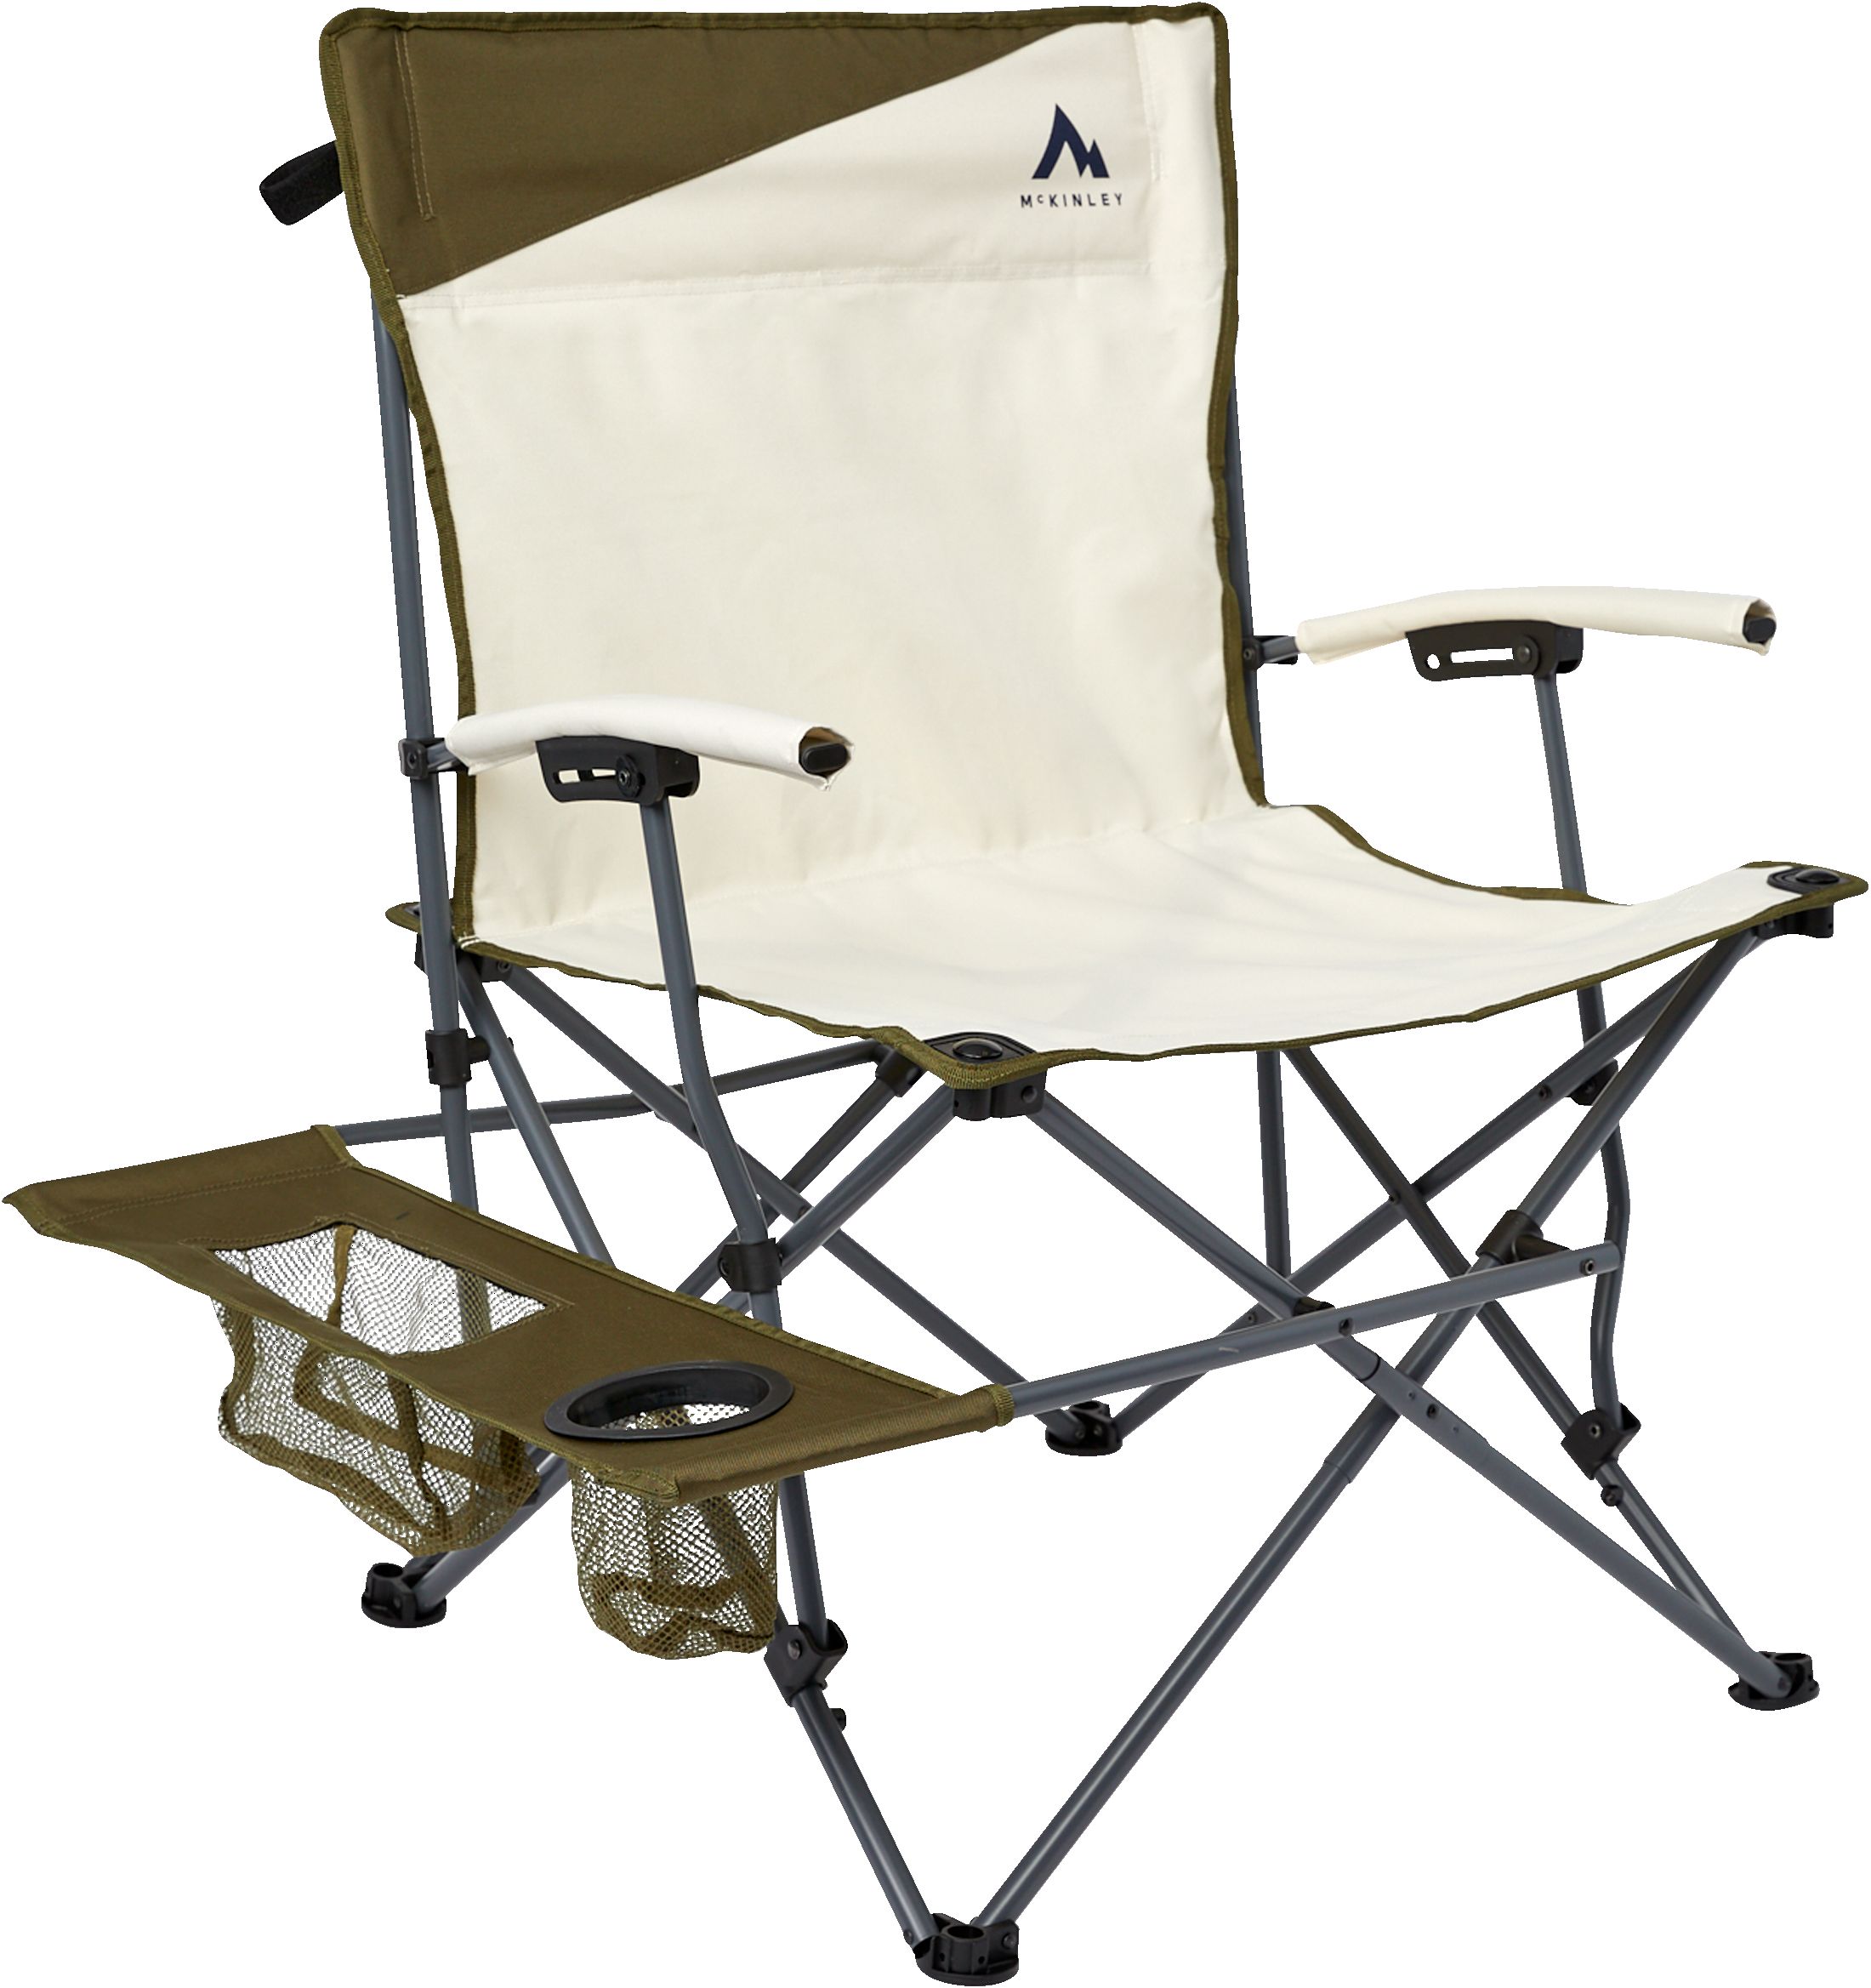 Image of McKINLEY Quad Fold Chair